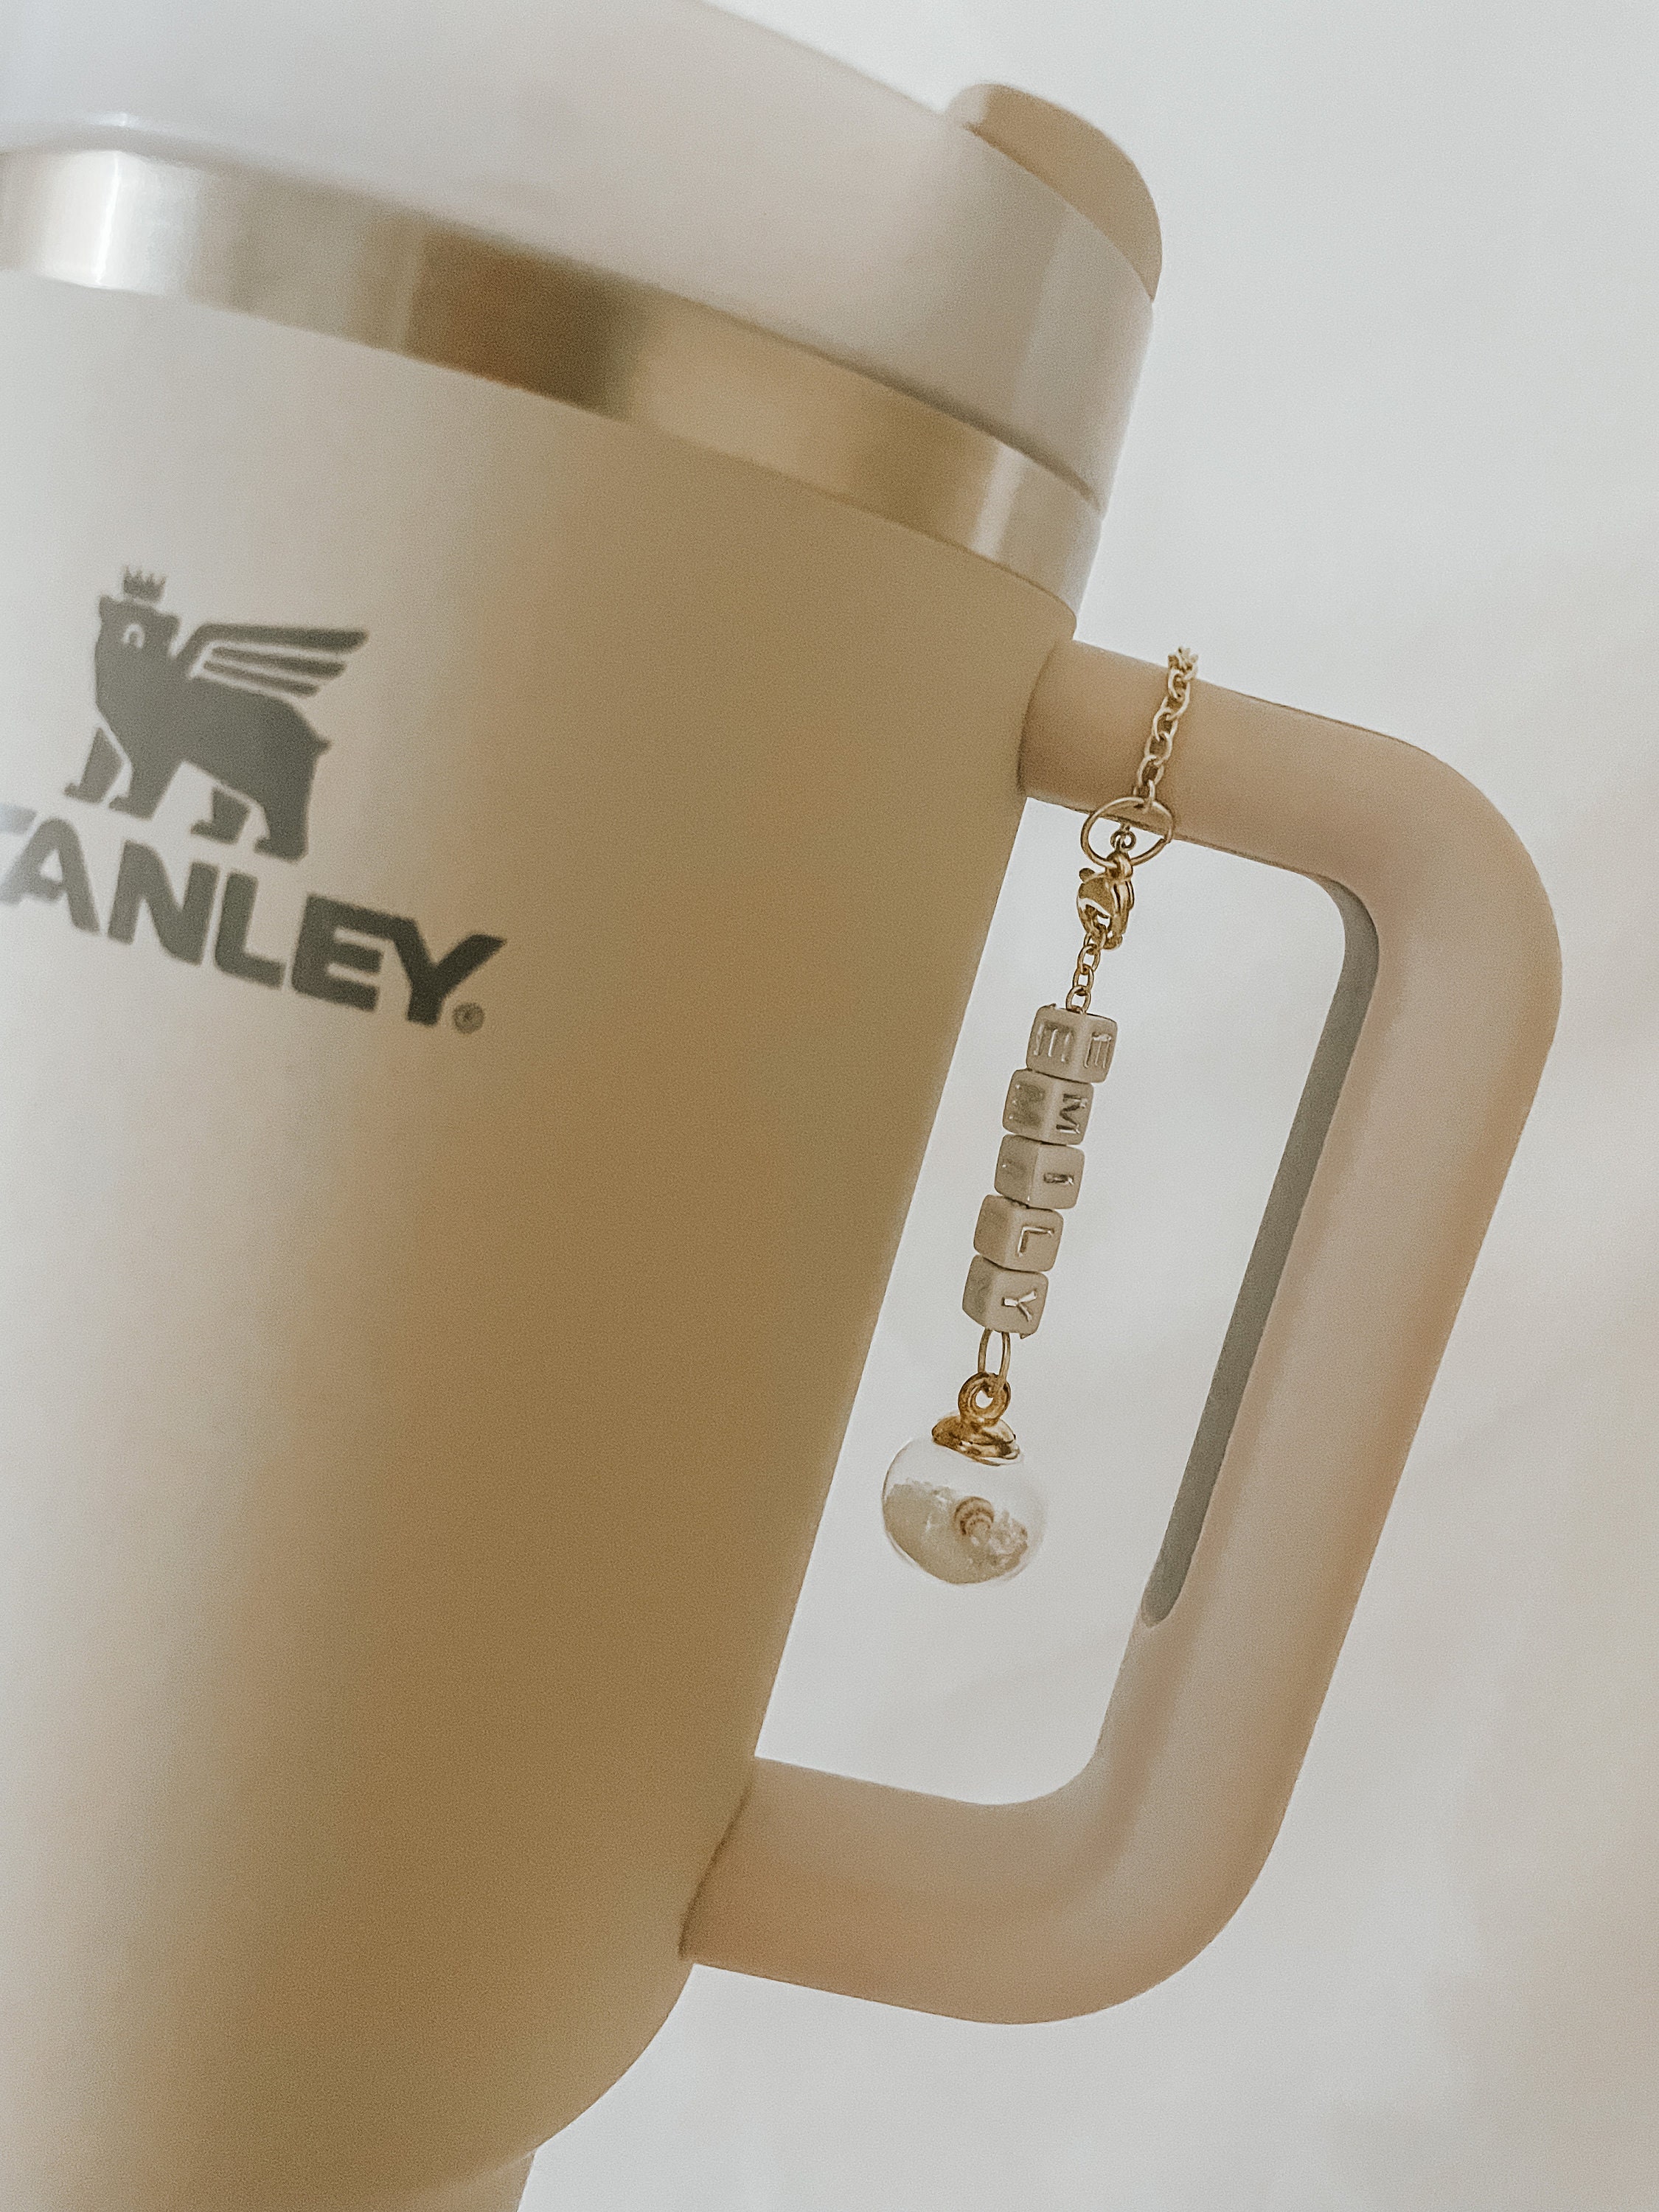 Stanley Tumbler Cup Charm Accessories for Water Bottle Stanley -  in  2023